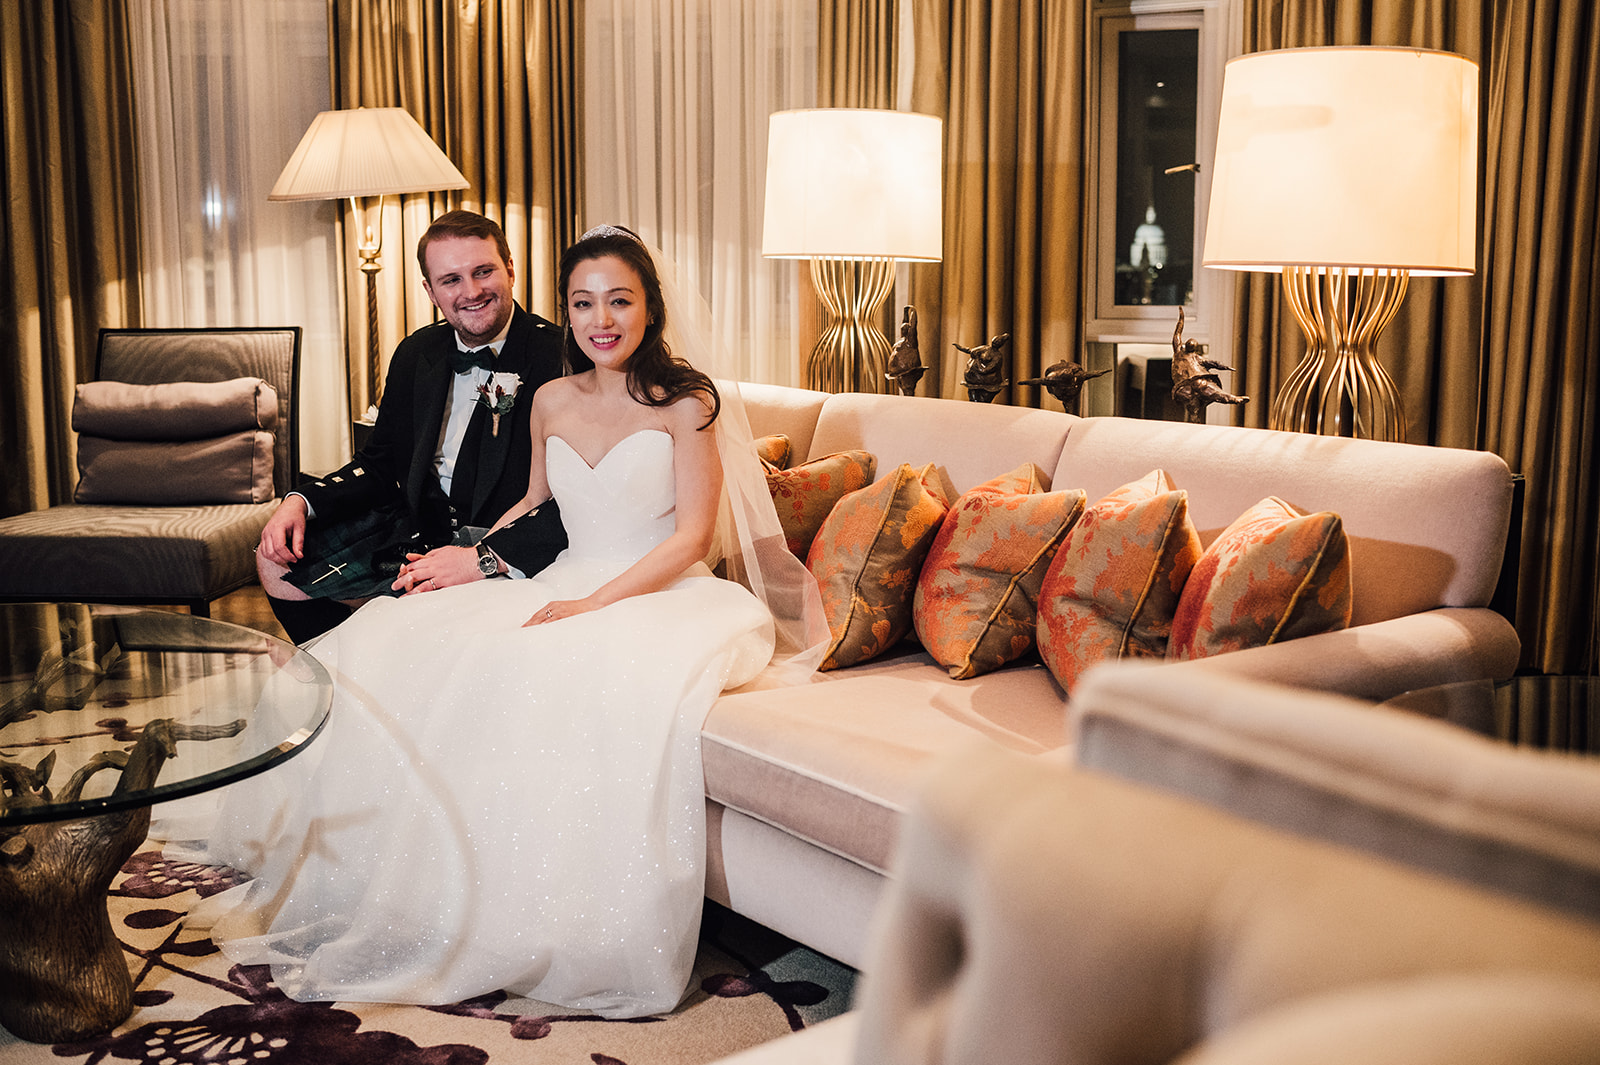 Bride and groom portrait in the President's suite at Corinthia, London